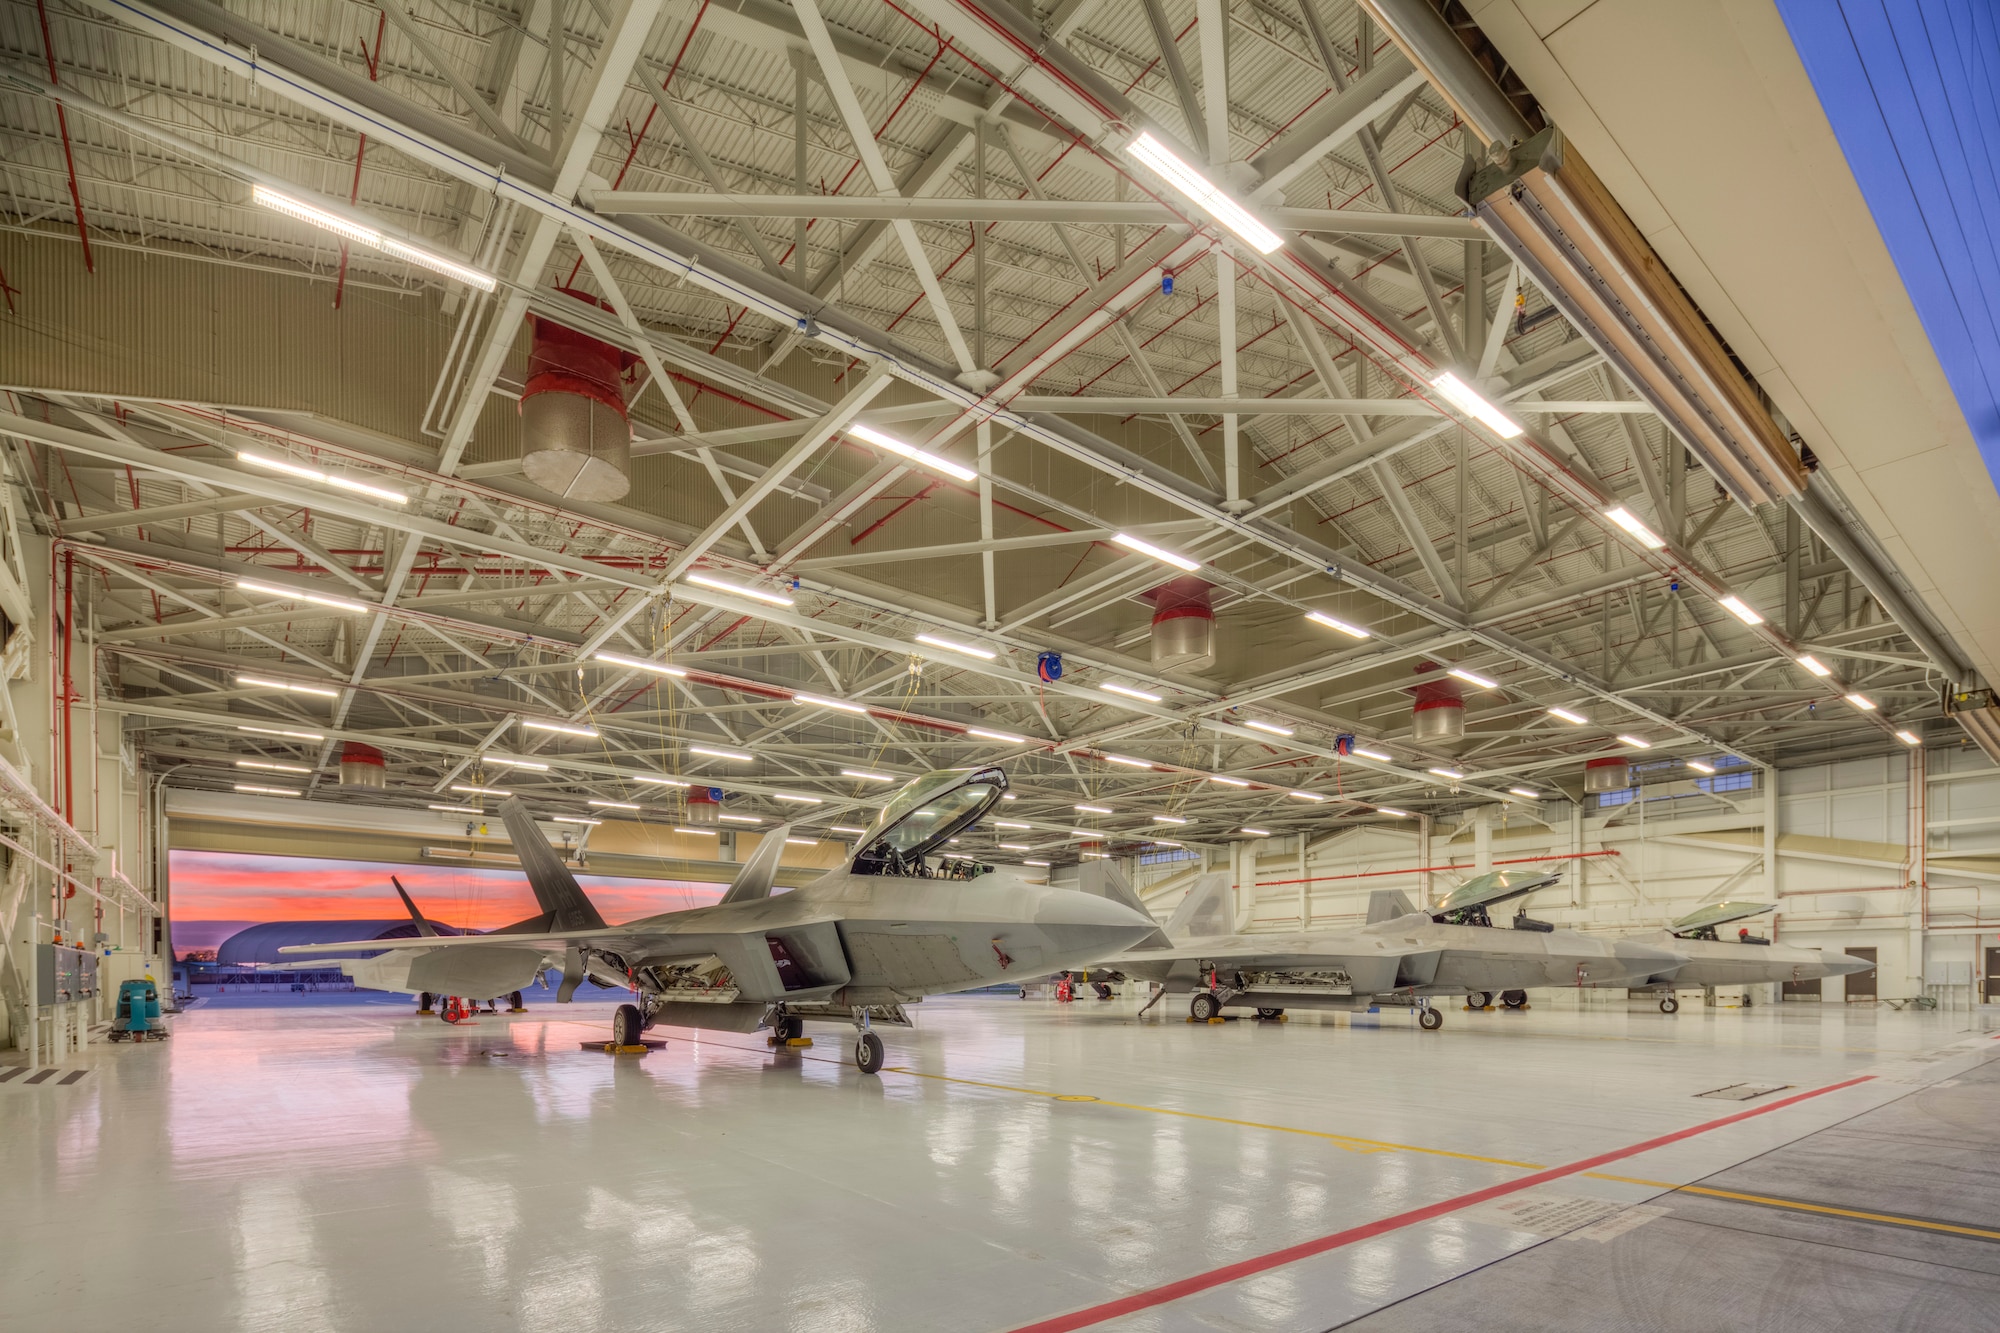 An F-22 hangar, squadron operations and aircraft maintenance unit at Joint Base Pearl Harbor-Hickam, Hawaii, shared top honors for facility design in the 2014 Air Force Design Awards. In addition to aesthetic qualities, the annual awards program considers energy efficiency, functionality and sustainability when singling out the Air Force’s best design projects. (Photo courtesy/ Douglas Peebles Photography)